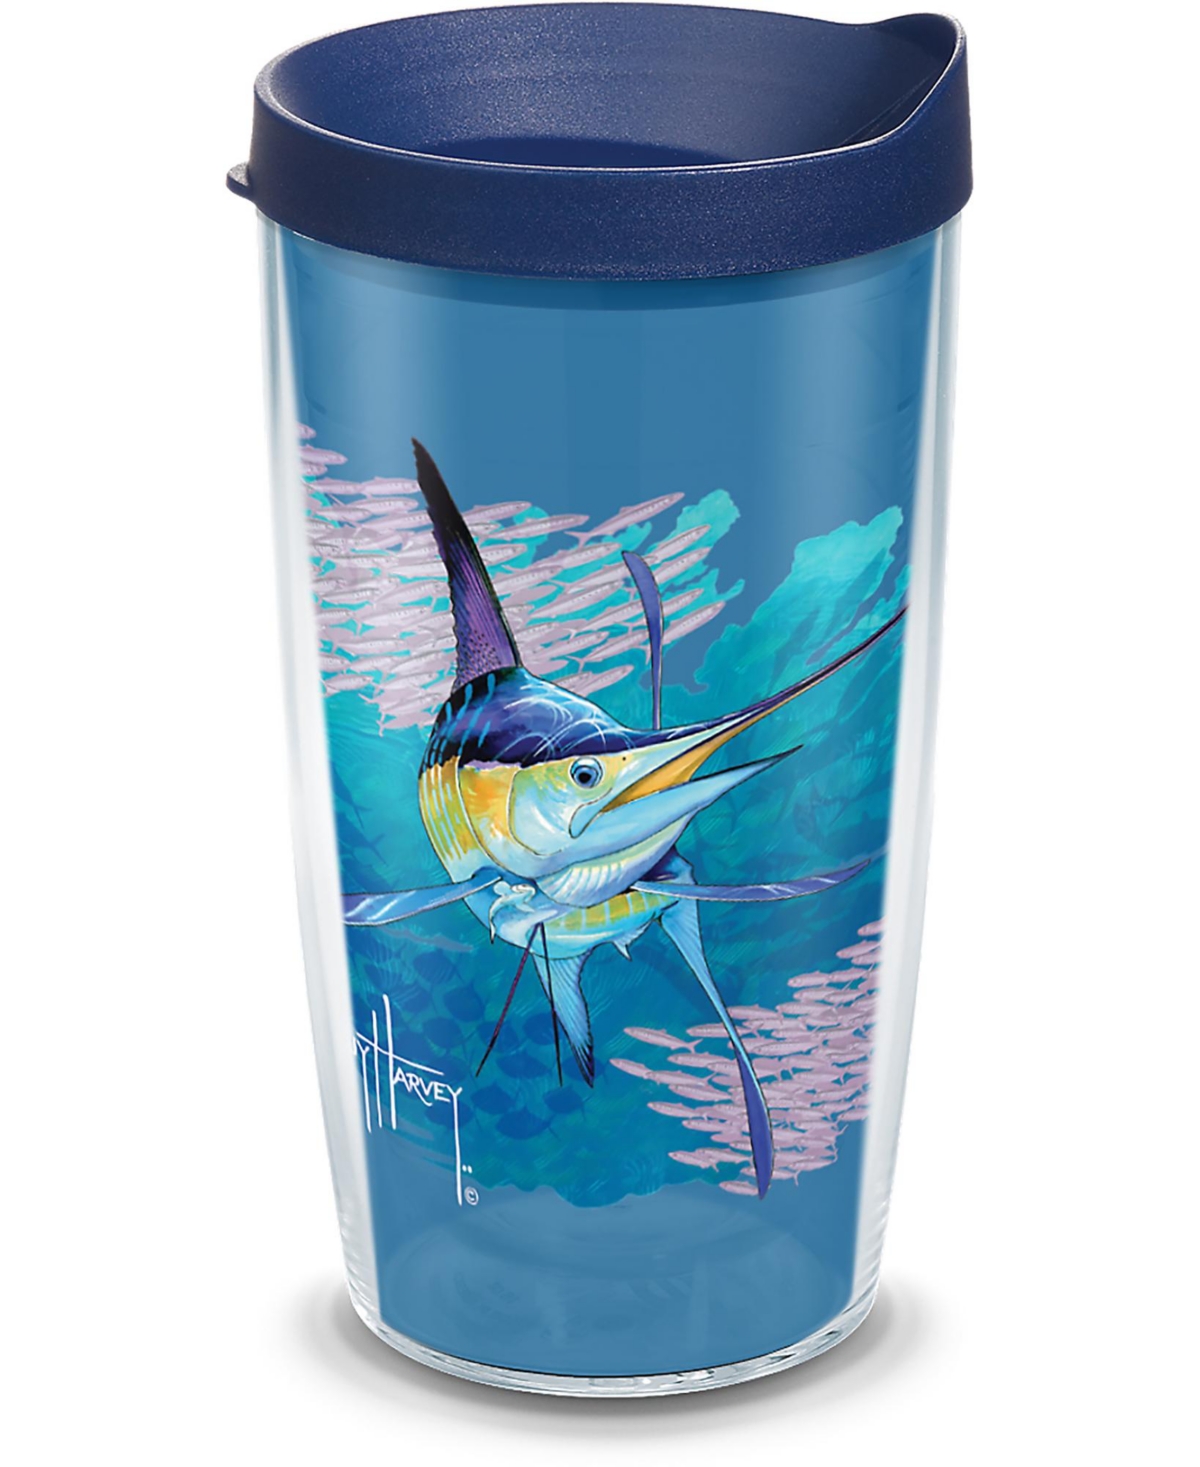 Tervis Tumbler Tervis Guy Harvey - Offshore Haul Marlin Made In Usa Double Walled Insulated Tumbler Travel Cup Keep In Open Miscellaneous